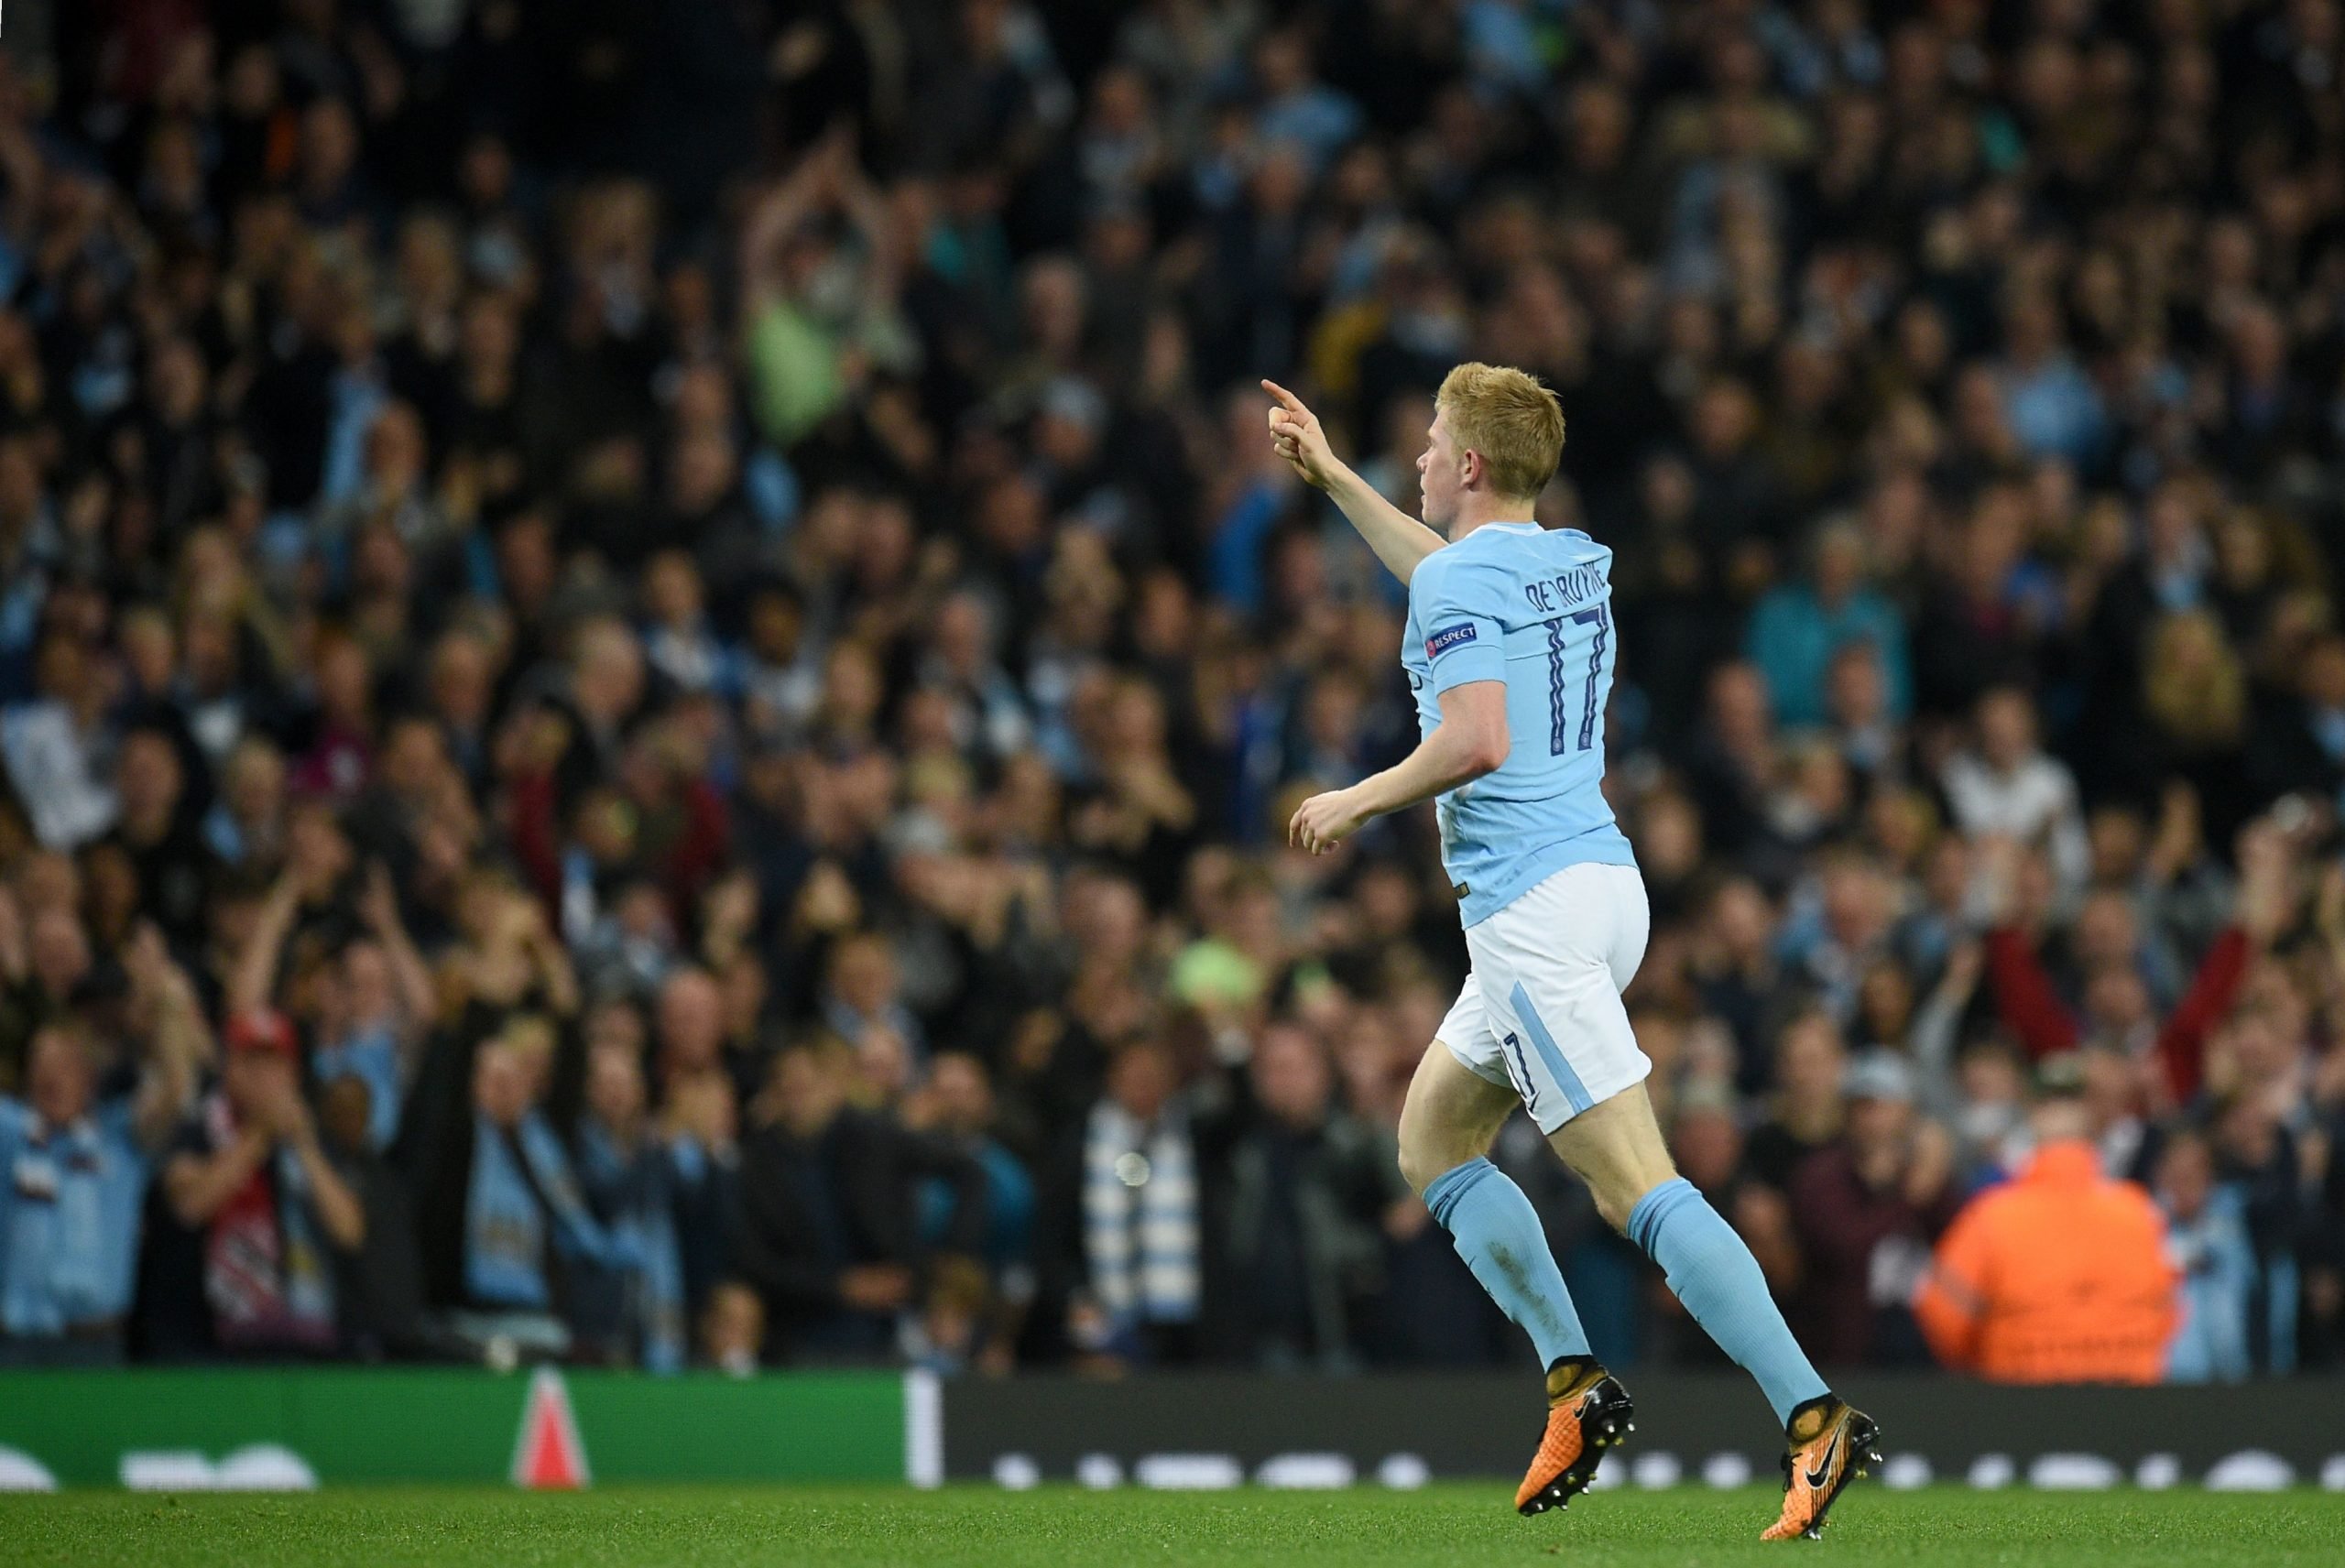 Manchester City's Belgian midfielder Kevin De Bruyne celebrates scoring his team's first goal during the Group F football match between Manchester City and Shakhtar Donetsk at the Etihad Stadium in Manchester, north west England, on September 26, 2017. / AFP PHOTO / Oli SCARFF        (Photo credit should read OLI SCARFF/AFP/Getty Images)